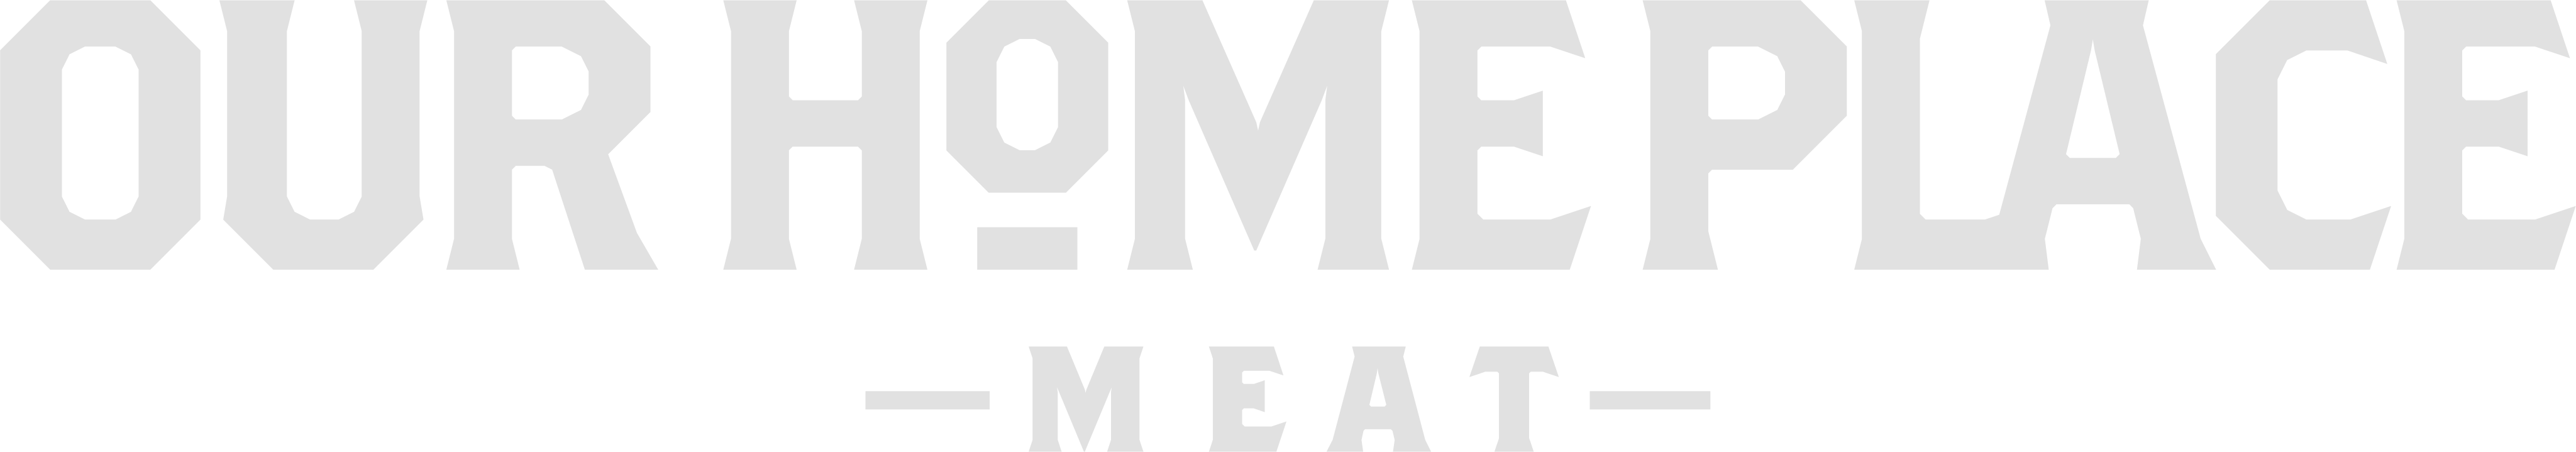 Our Home Place Meat logo